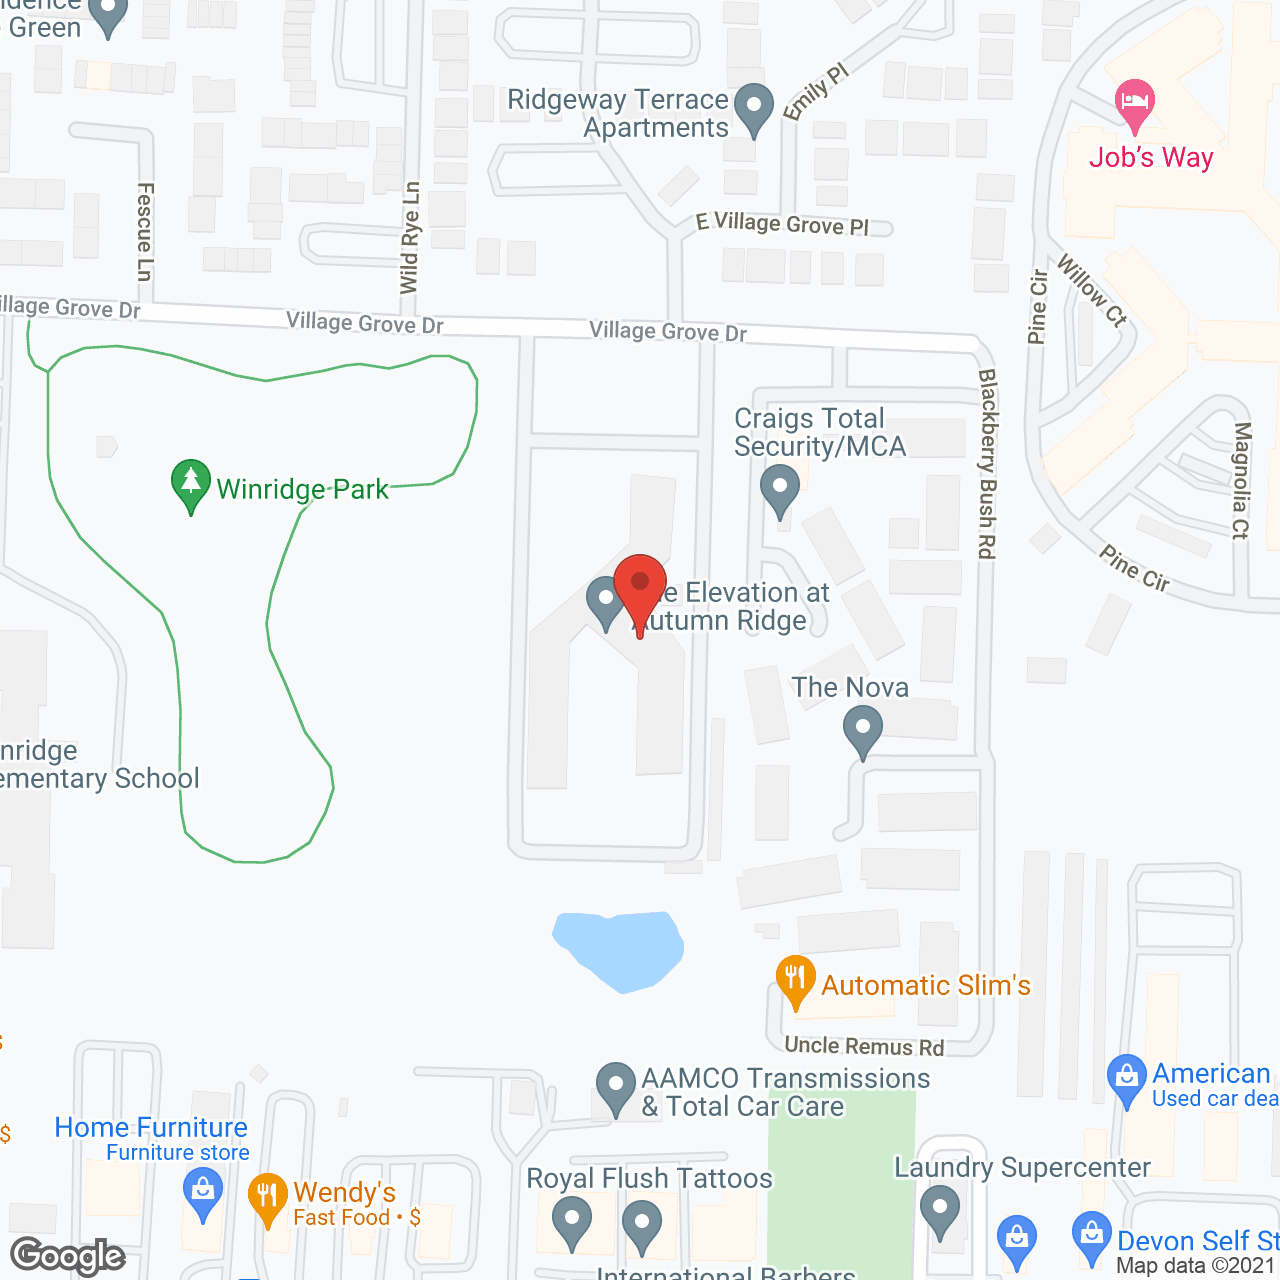 The Elevation at Autumn Ridge in google map